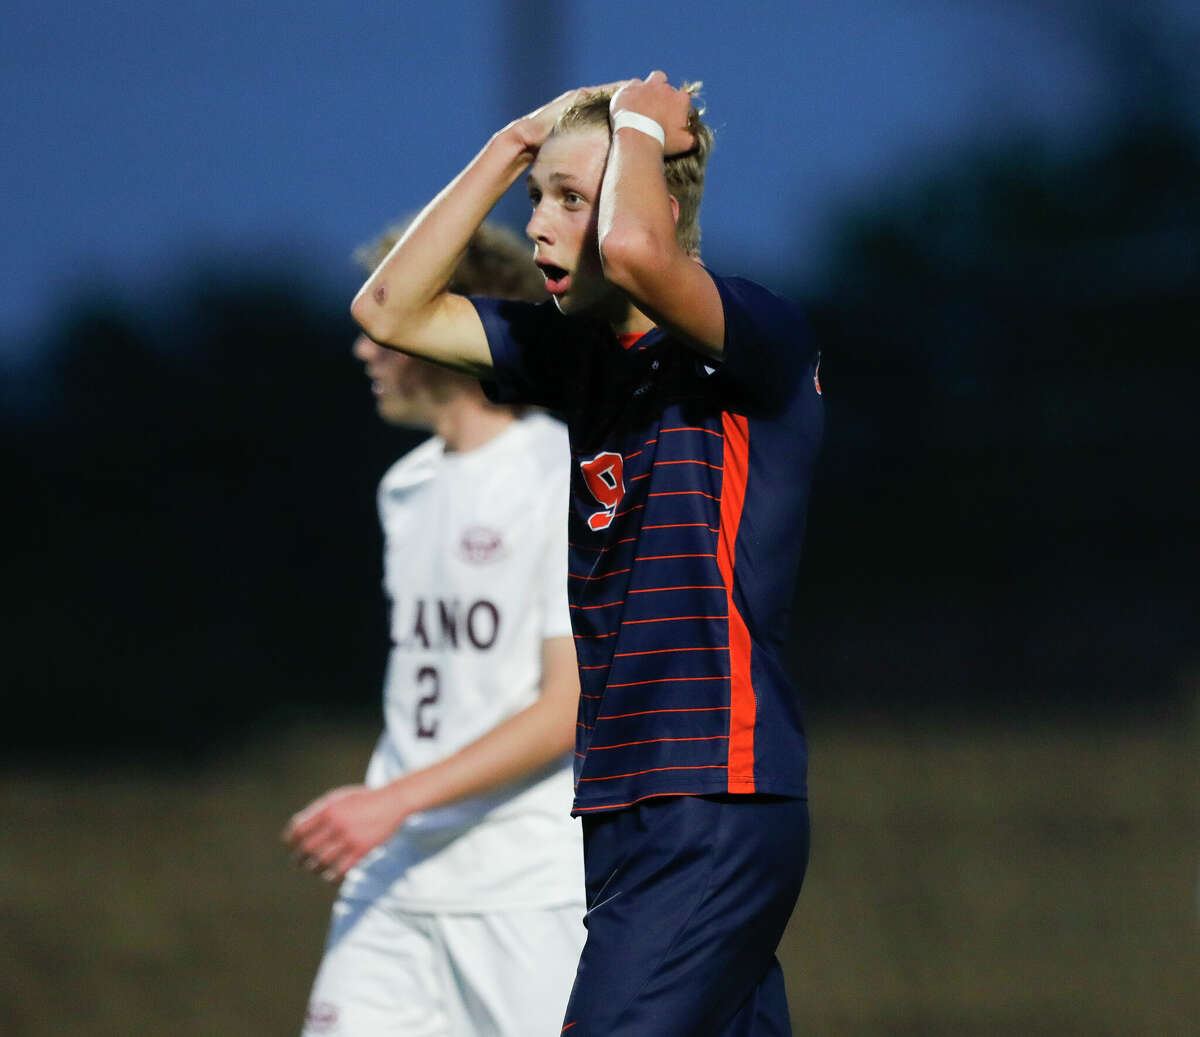 Seven Lakes forward Hunter Merritt (9) reacts after missing a shot on goal in the first half of a Class 6A boys state semifinal match during the UIL State Soccer Championships, Friday, April 15, 2022, in Georgetown.